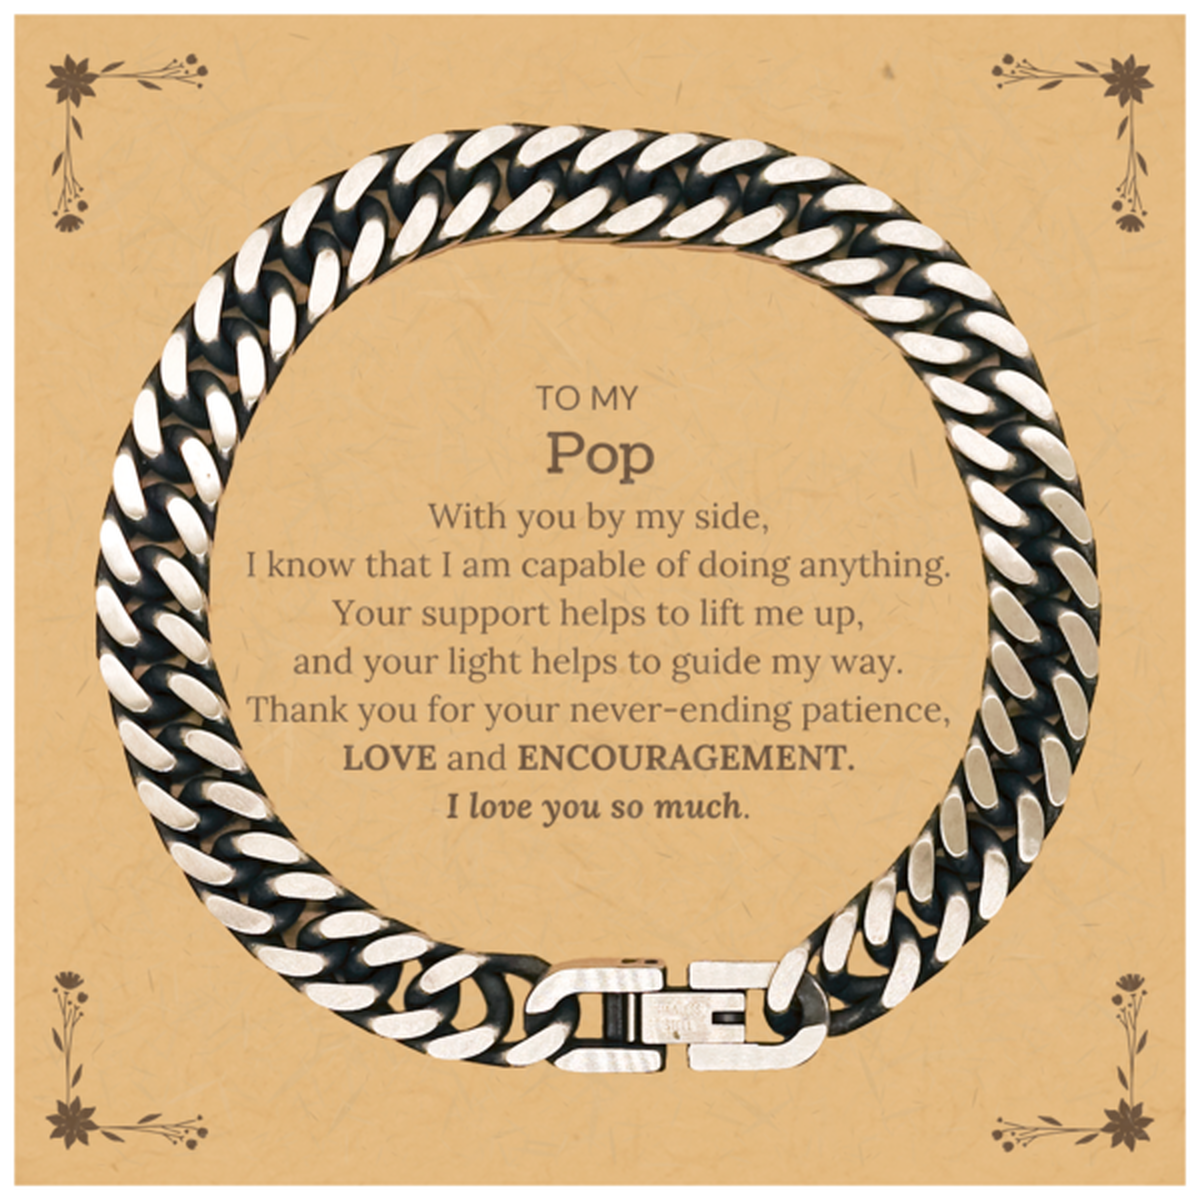 Appreciation Pop Cuban Link Chain Bracelet Gifts, To My Pop Birthday Christmas Wedding Keepsake Gifts for Pop With you by my side, I know that I am capable of doing anything. I love you so much